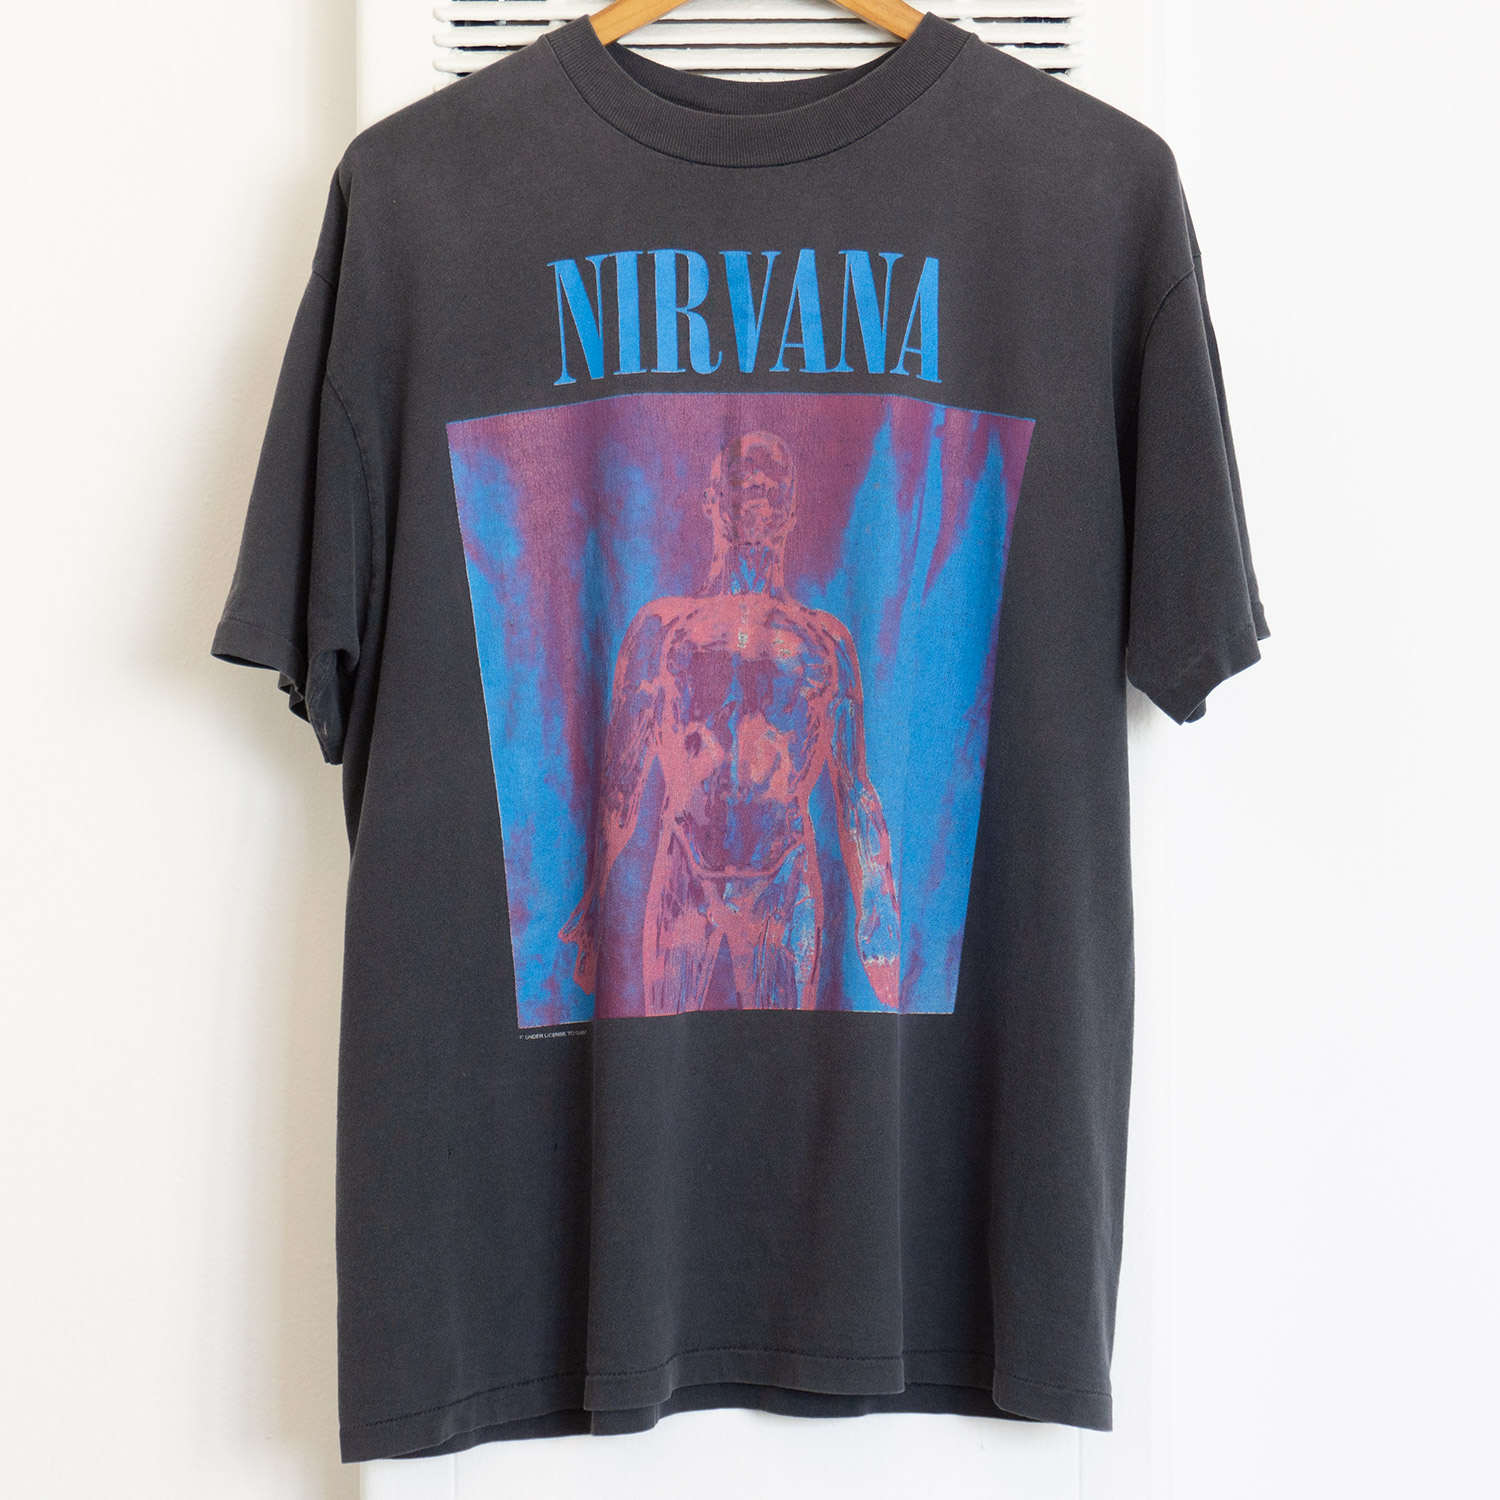 Nirvana Sliver T-shirt with Giant Neck Tag, Front